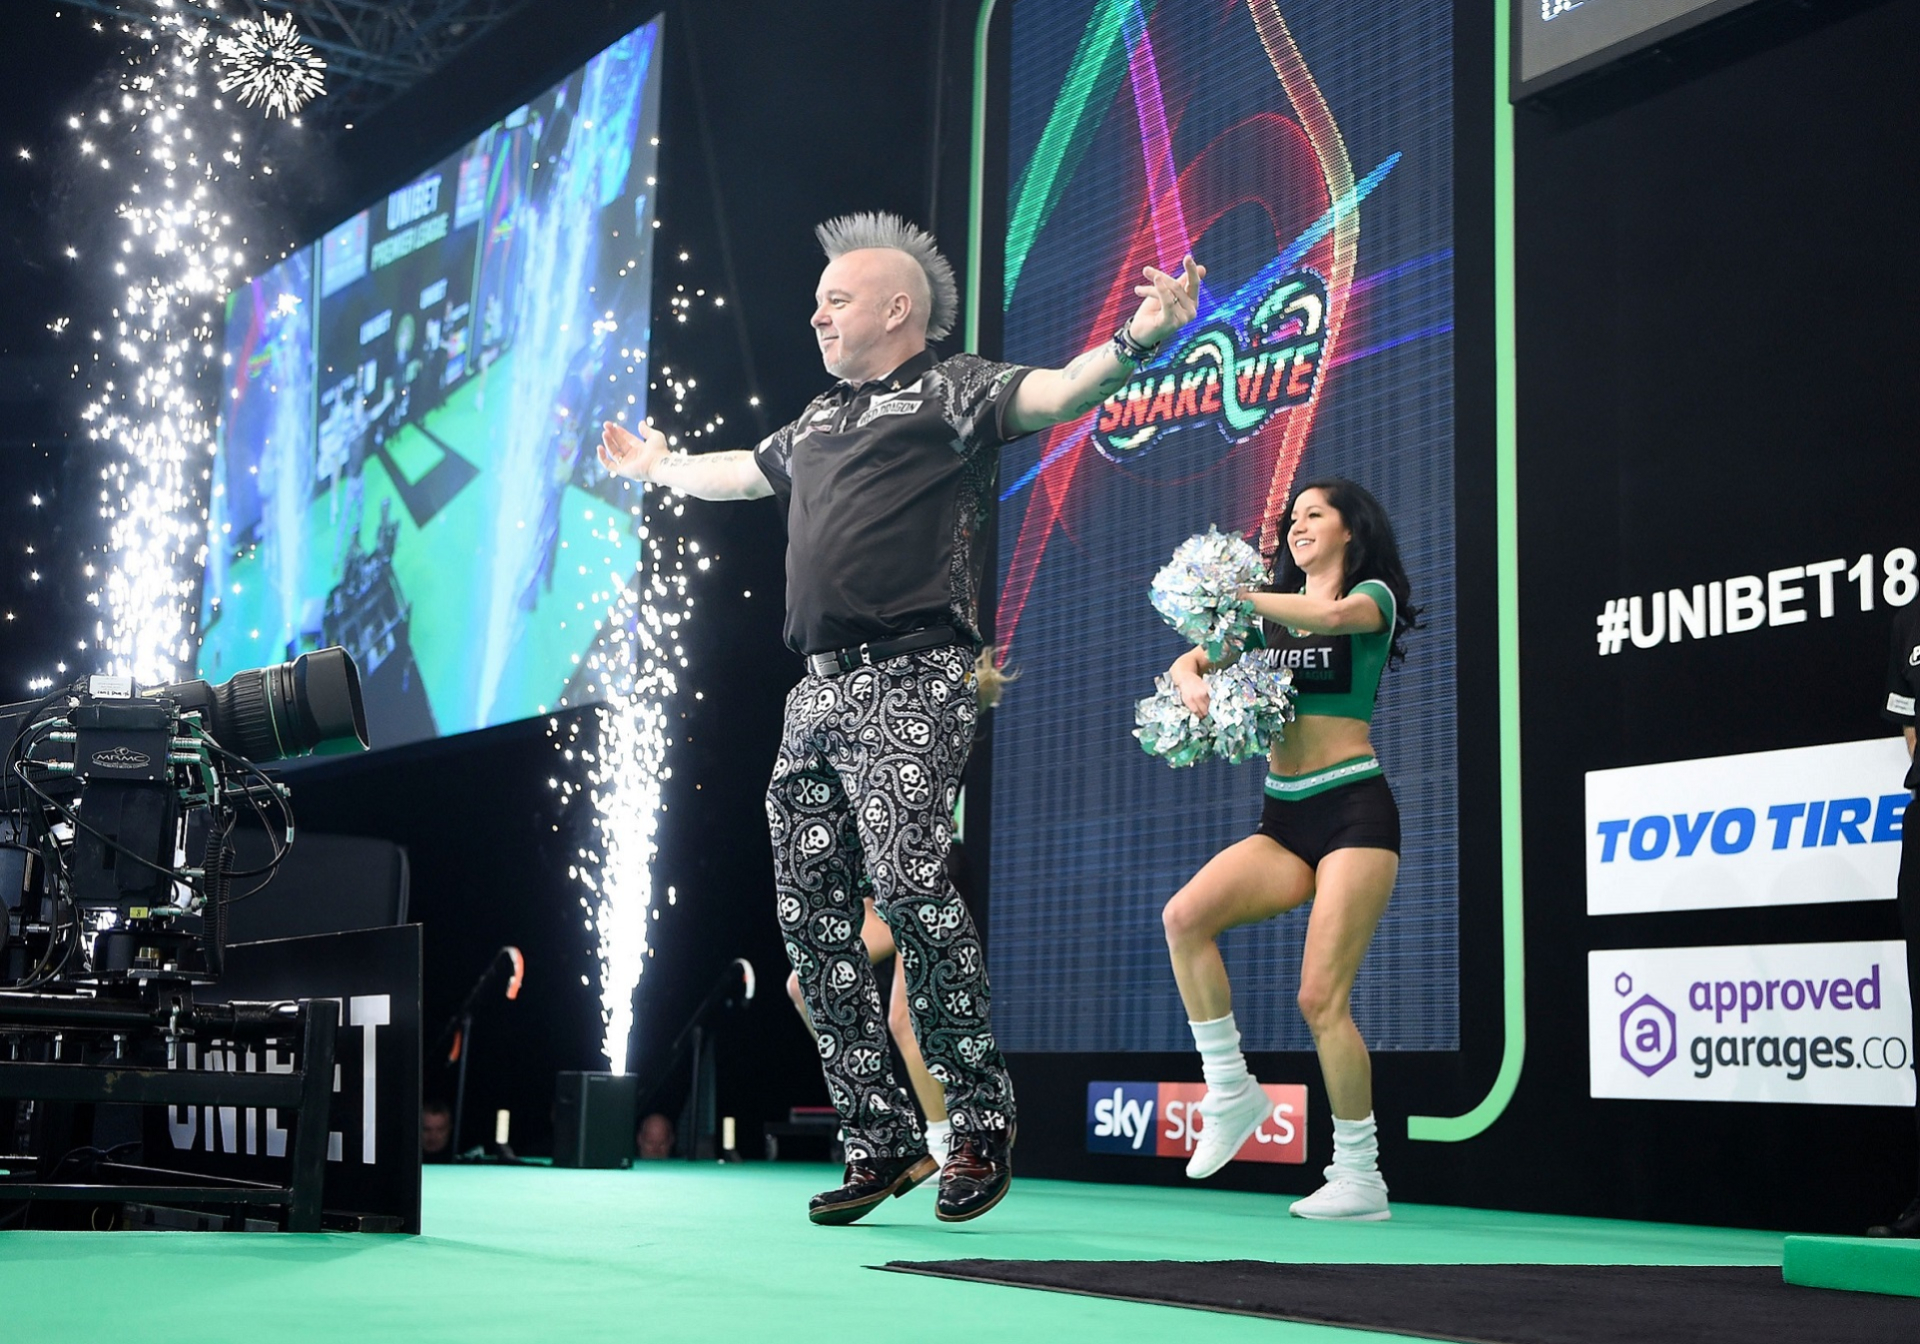 Peter Wright (Michael Cooper, PDC)